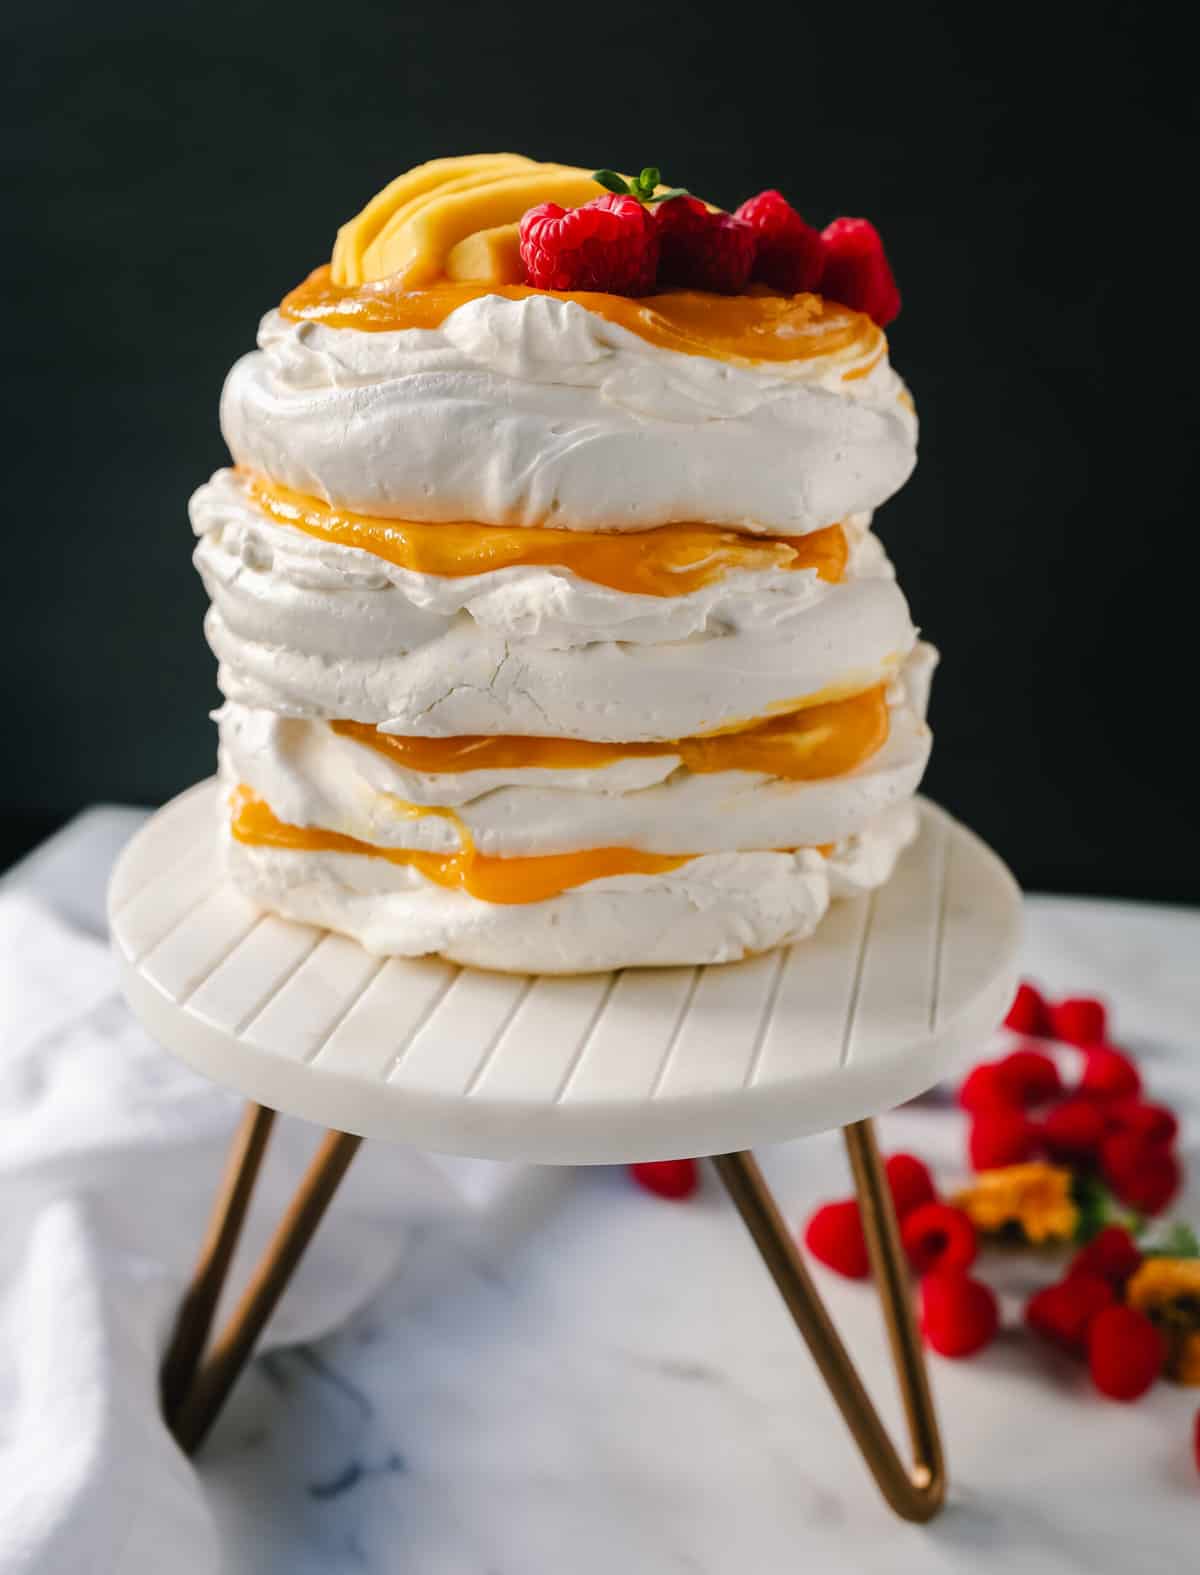 Pavlova. A stunning dessert with a crisp, crunchy outer shell with a soft, marshmallow-like center. Topped with fresh whipped cream and fresh fruit. It is a beautiful and delicious dessert to wow a crowd!